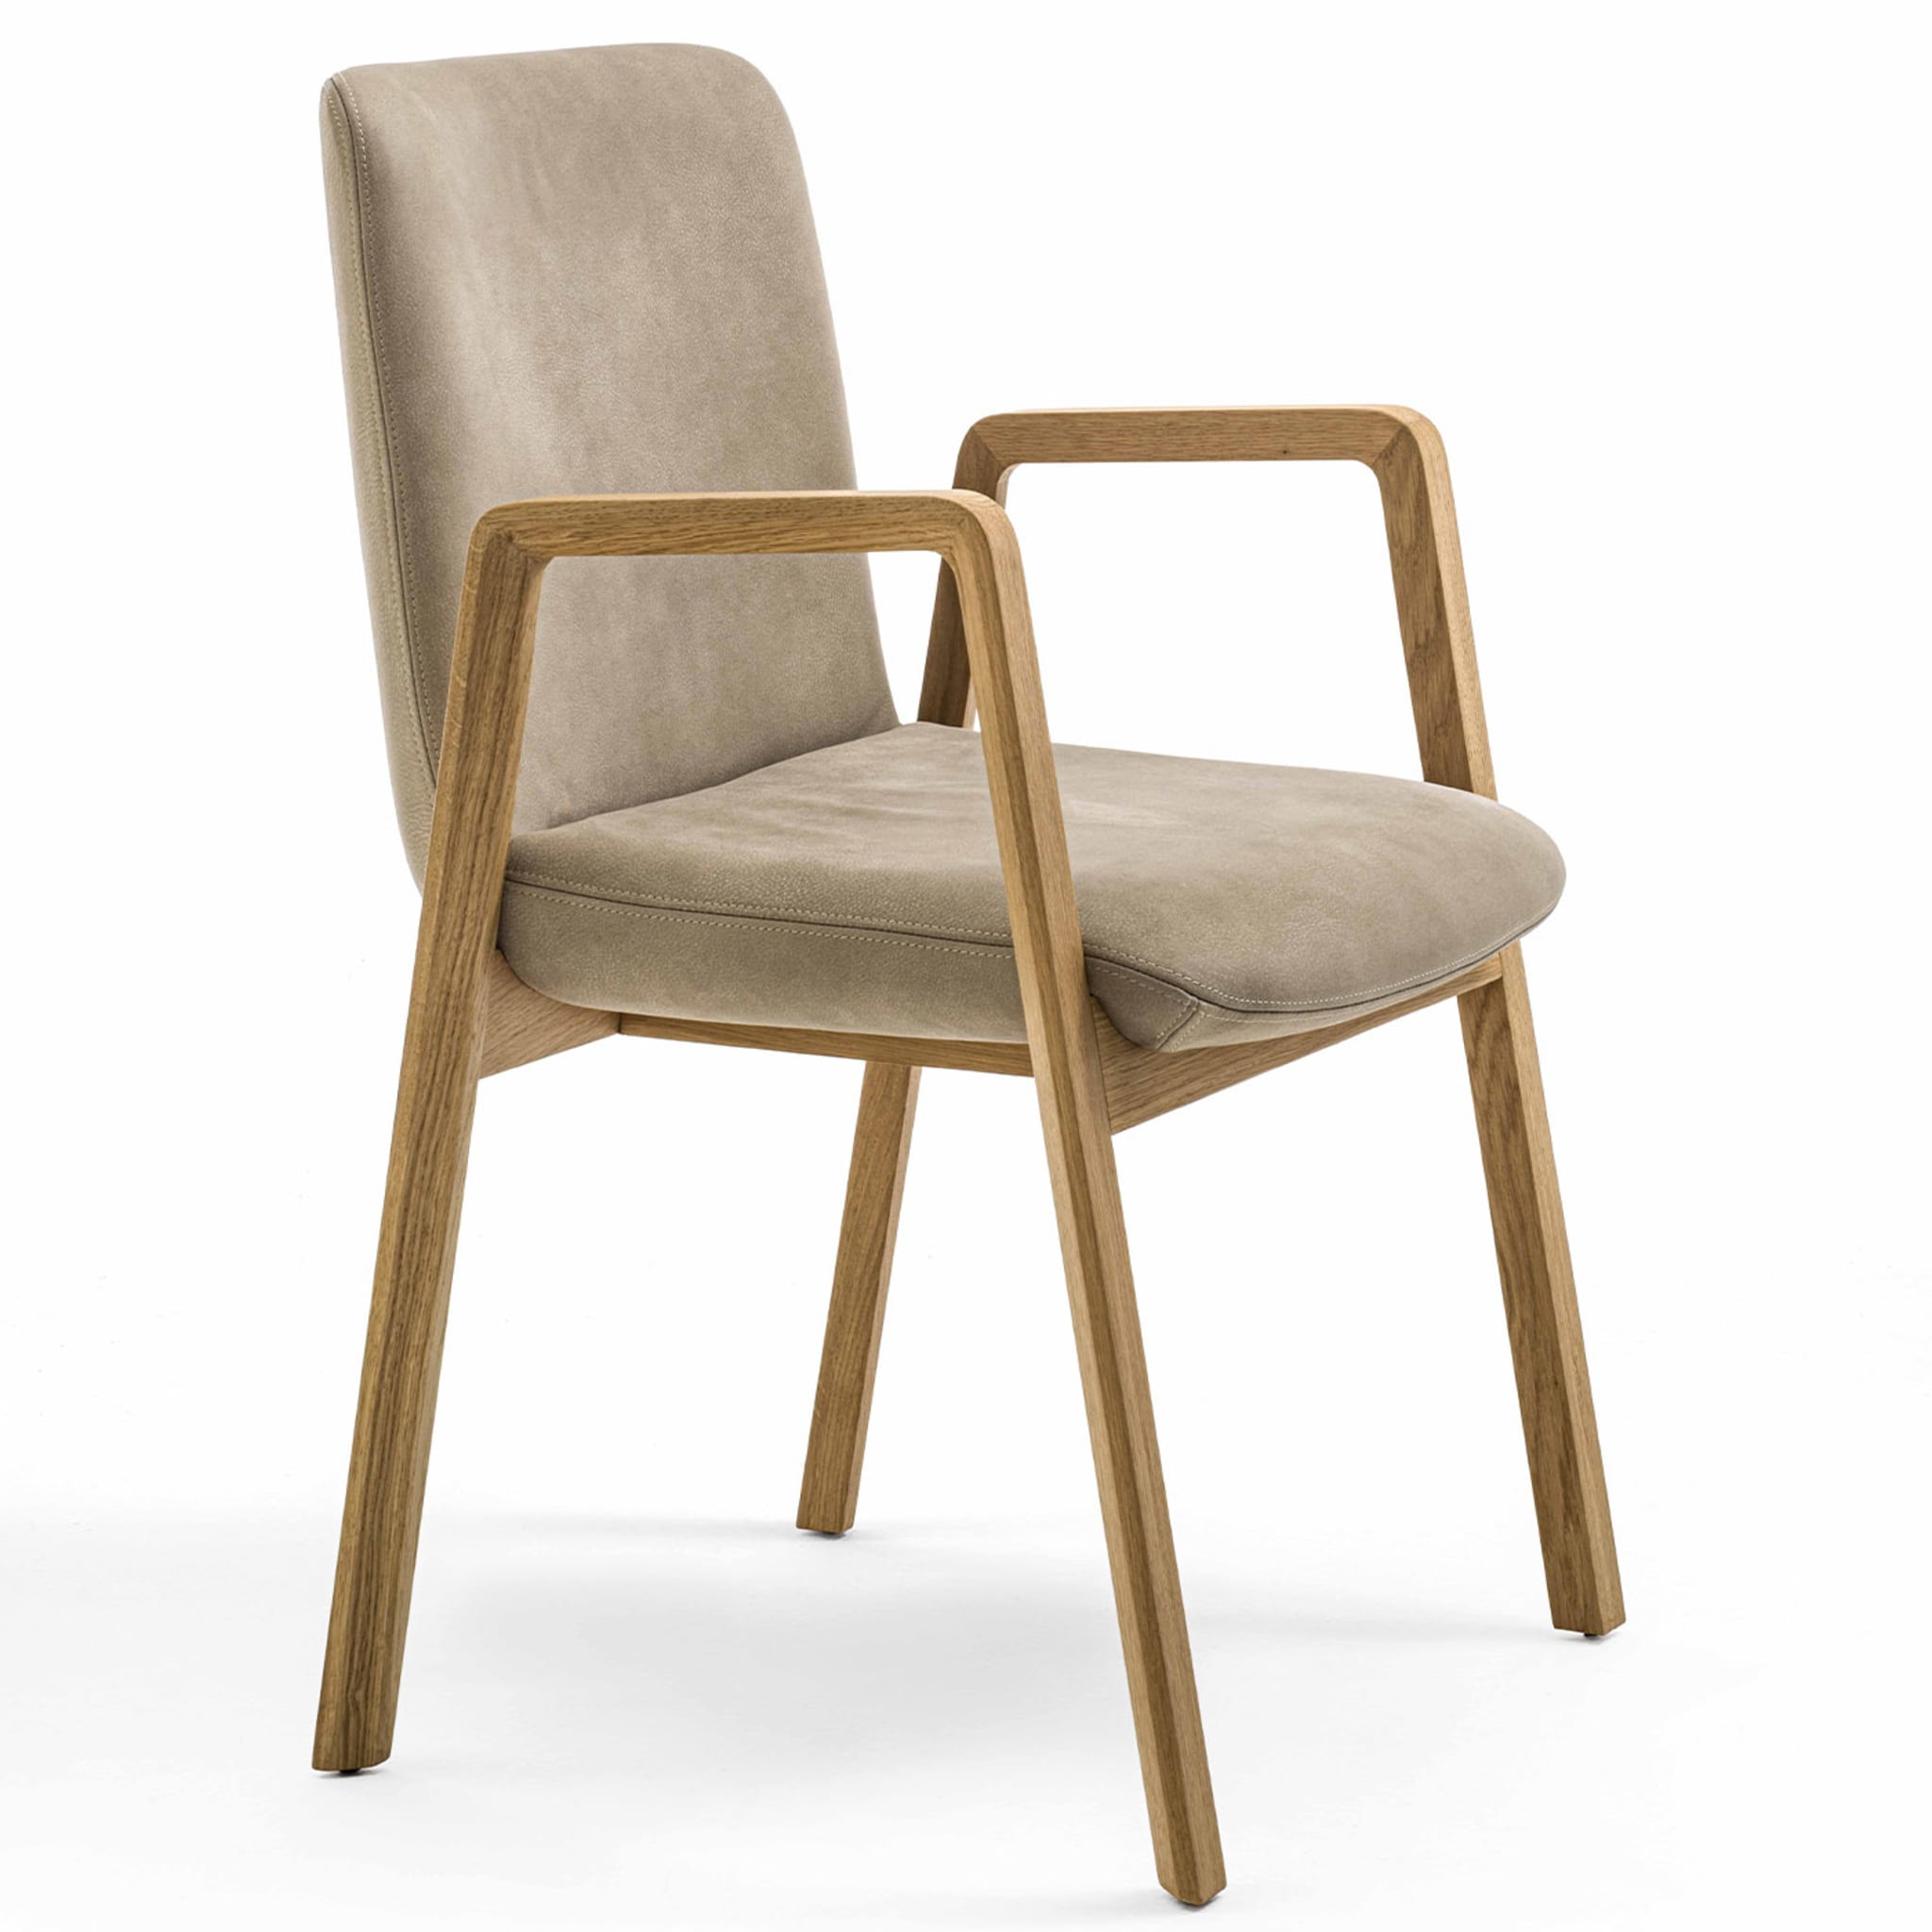 Noblé Brown Chair With Arms by Giuliano & Gabriele Cappelletti - Alternative view 2